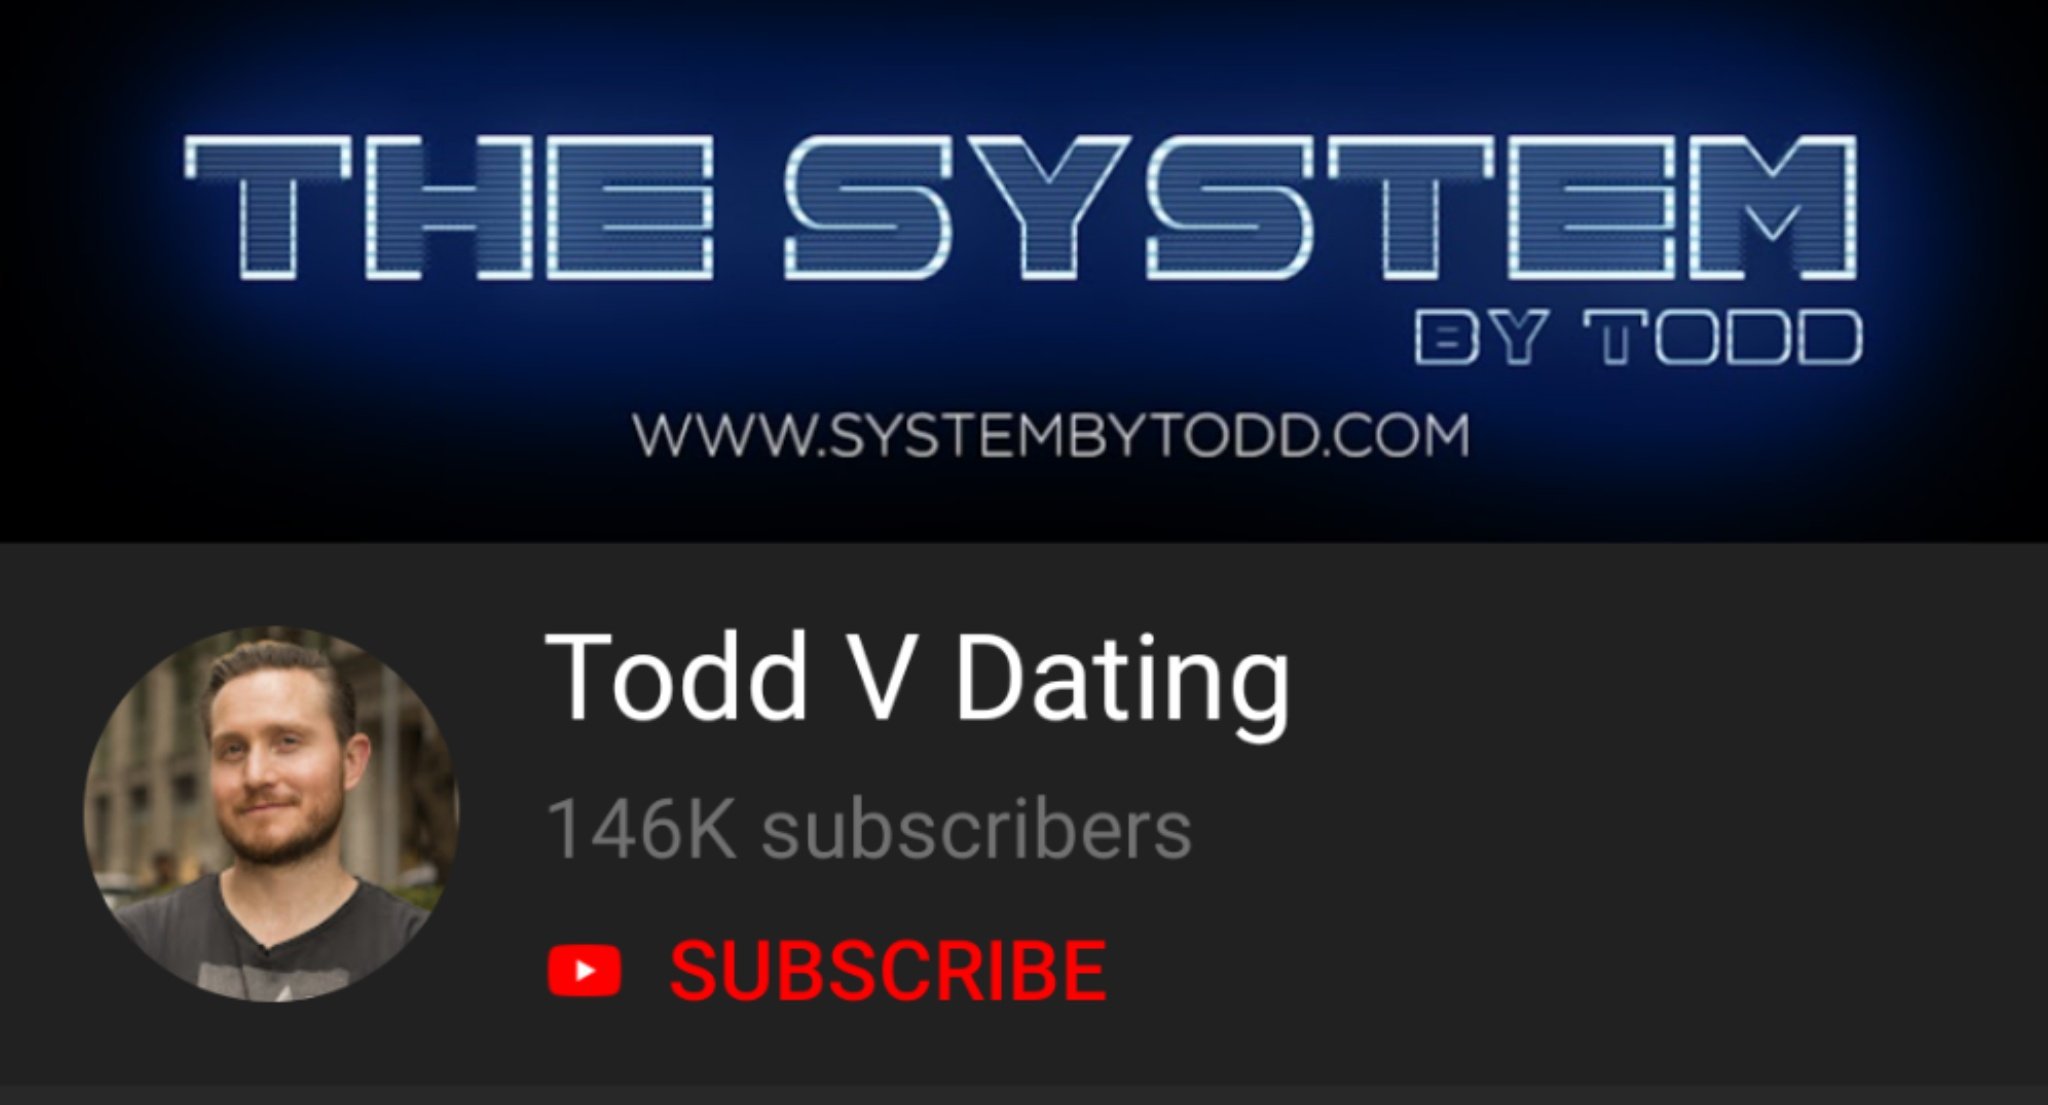 Todd v dating the system review